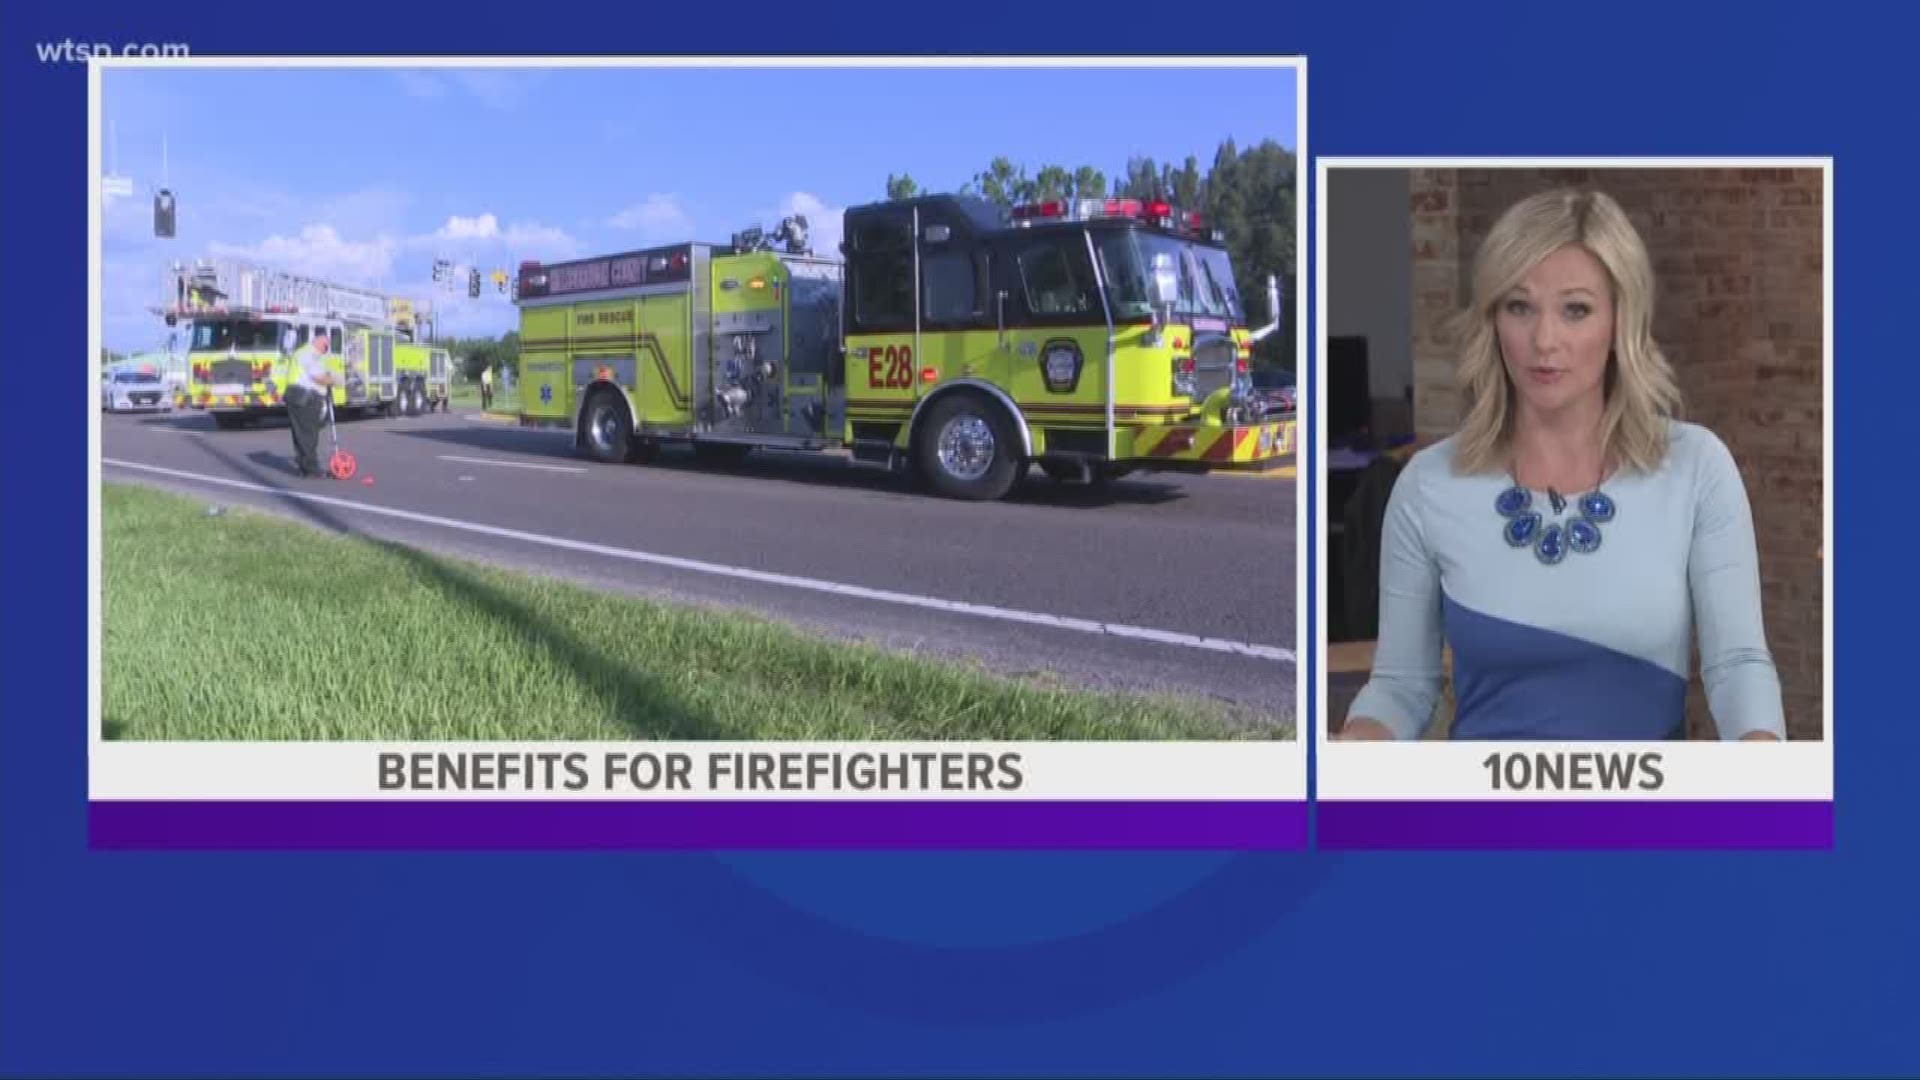 The Florida House Speaker said legislation covering firefighters who develop 21 different types of cancer will move forward.